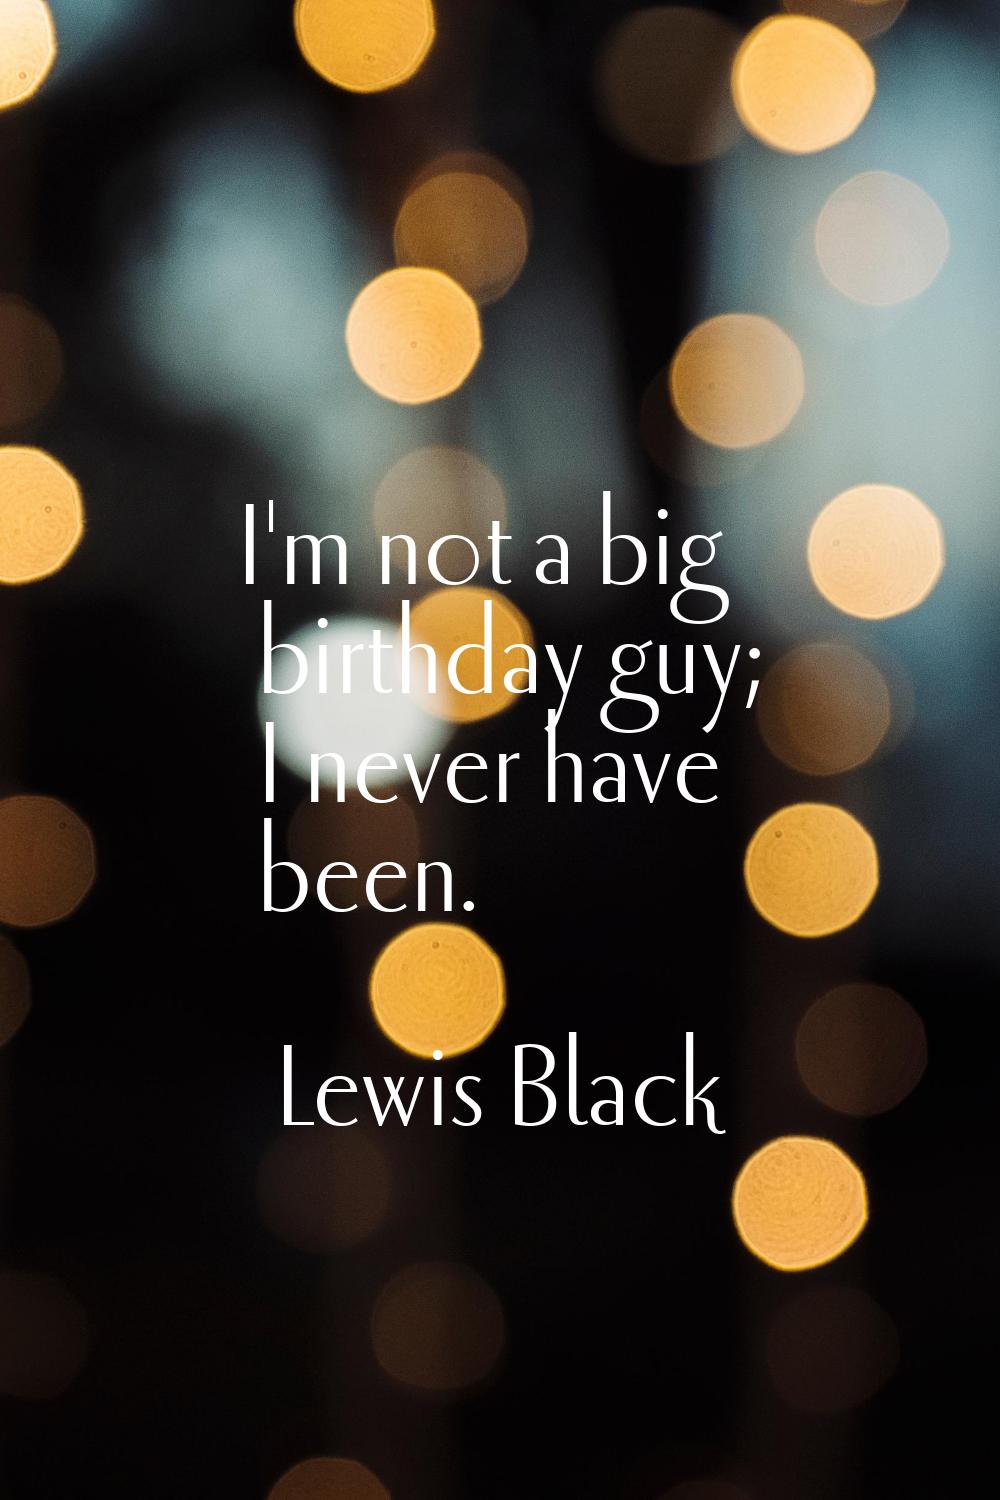 I'm not a big birthday guy; I never have been.